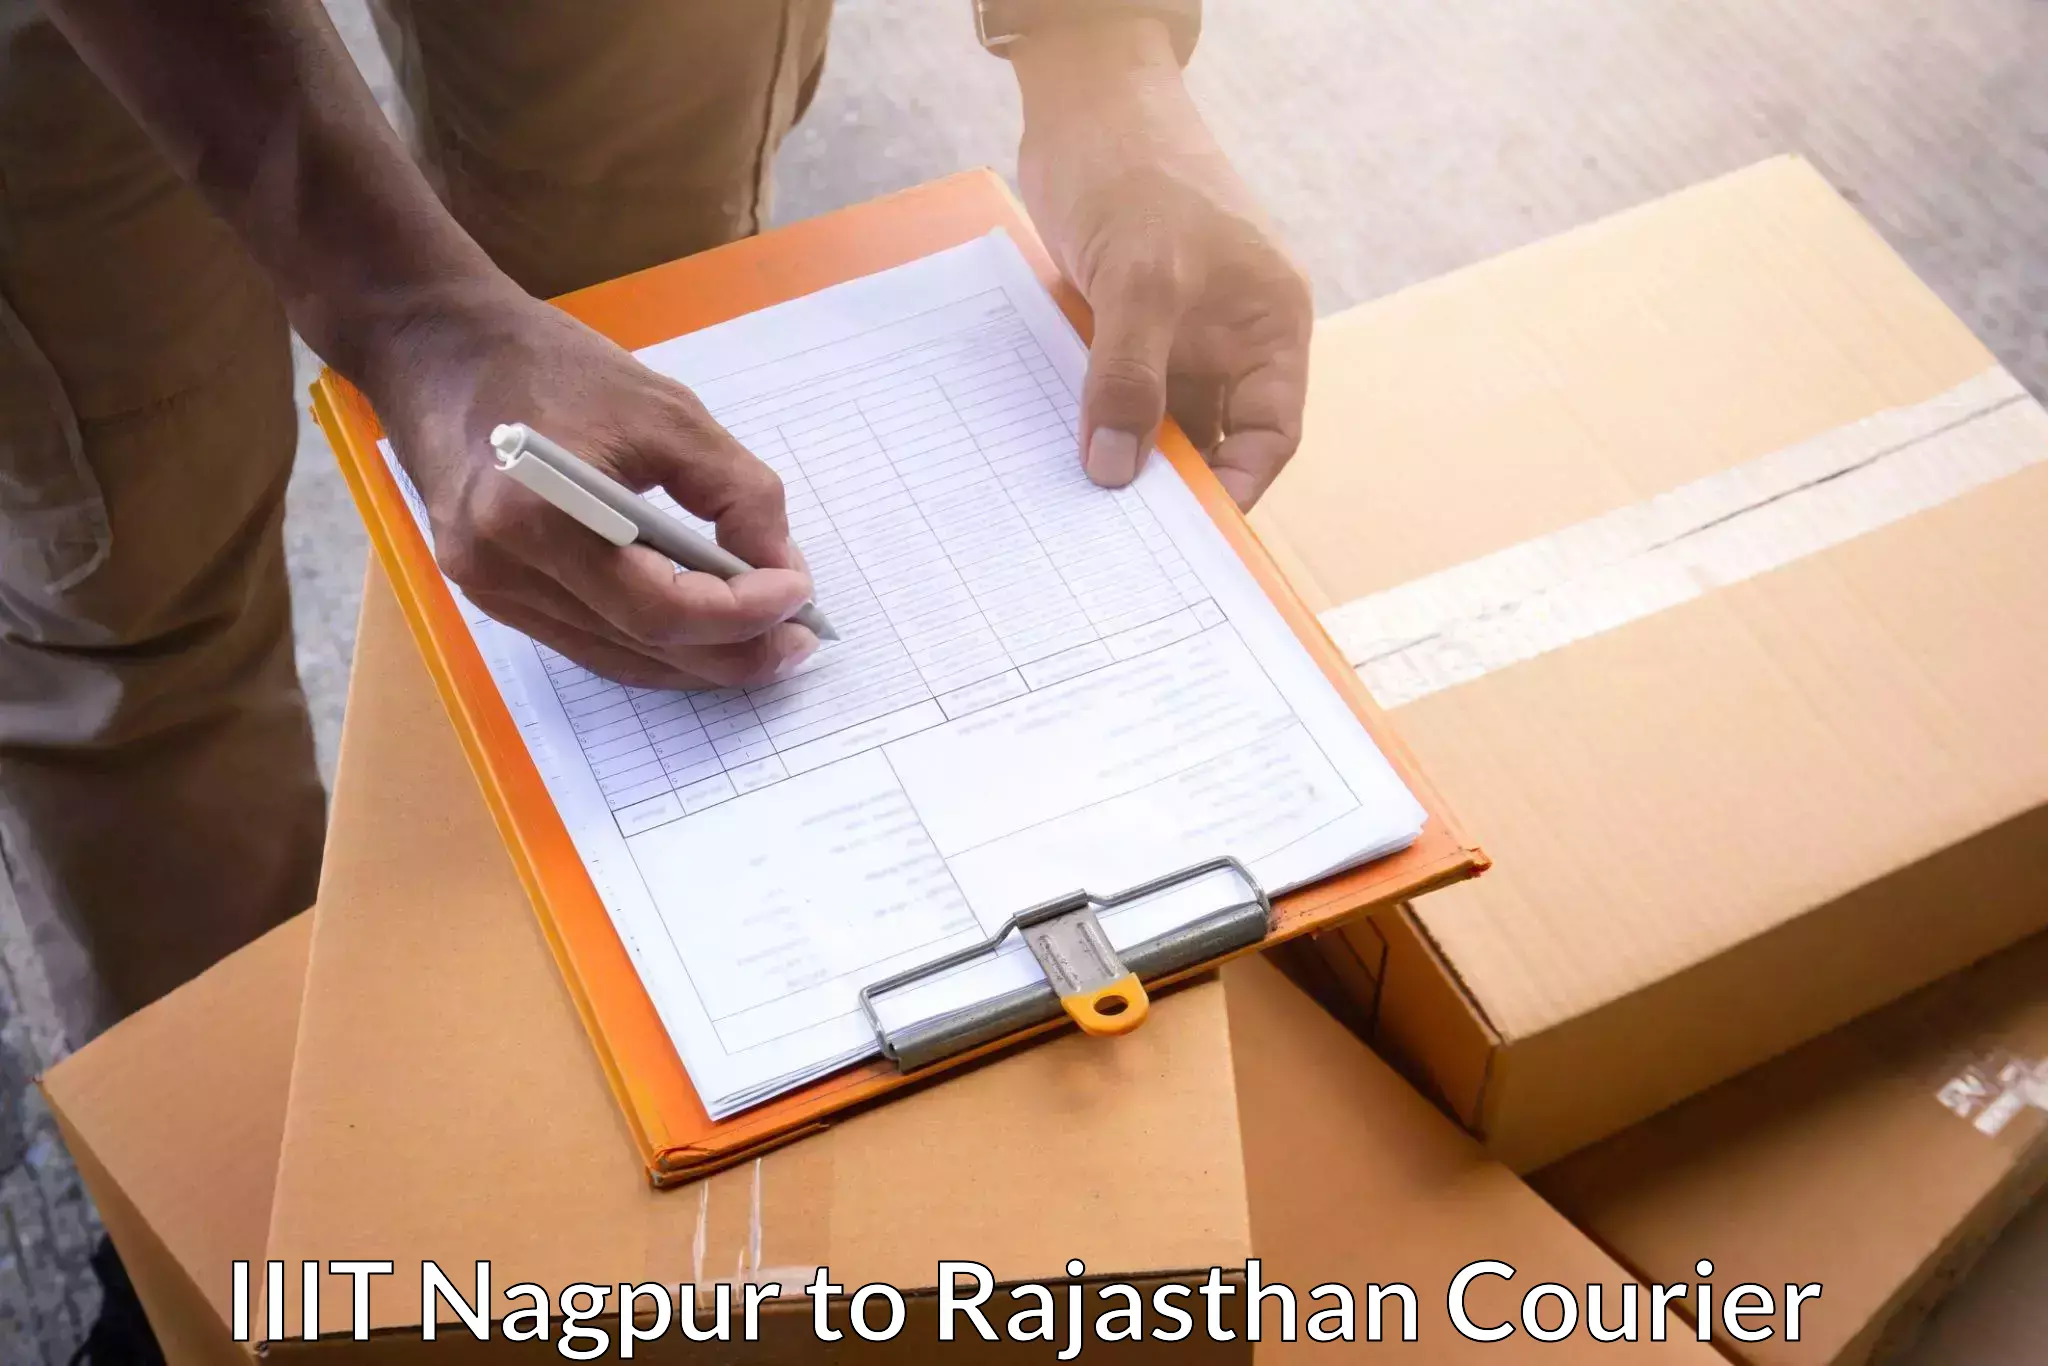 Tech-enabled shipping IIIT Nagpur to Suratgarh